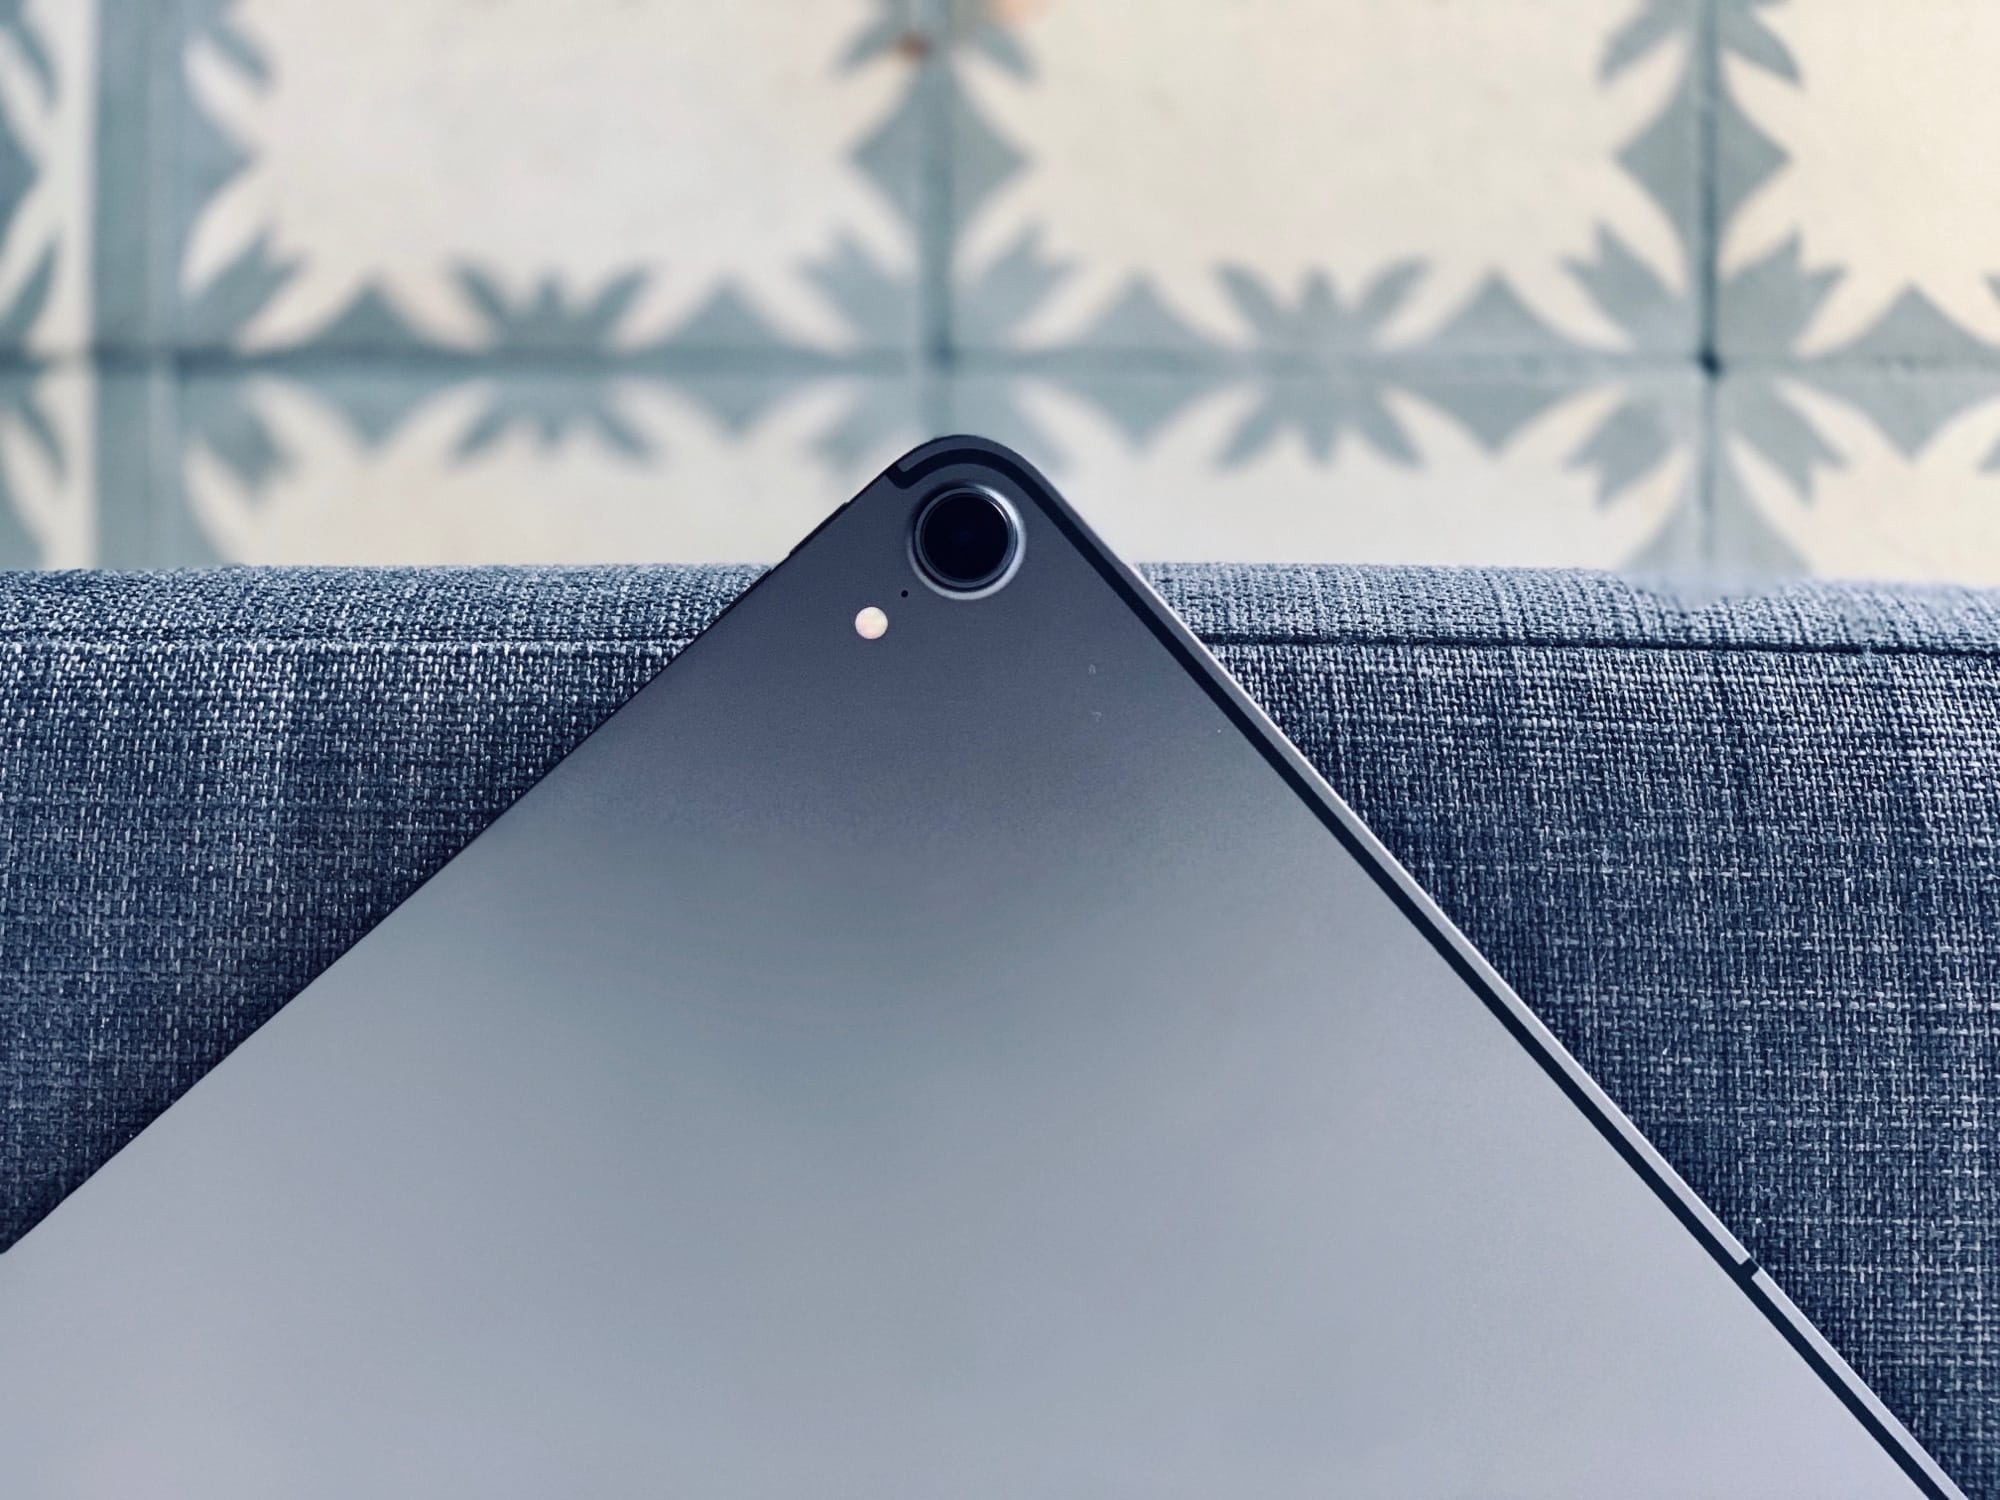 Your new iPad pro has some neat tricks up its sleeves.